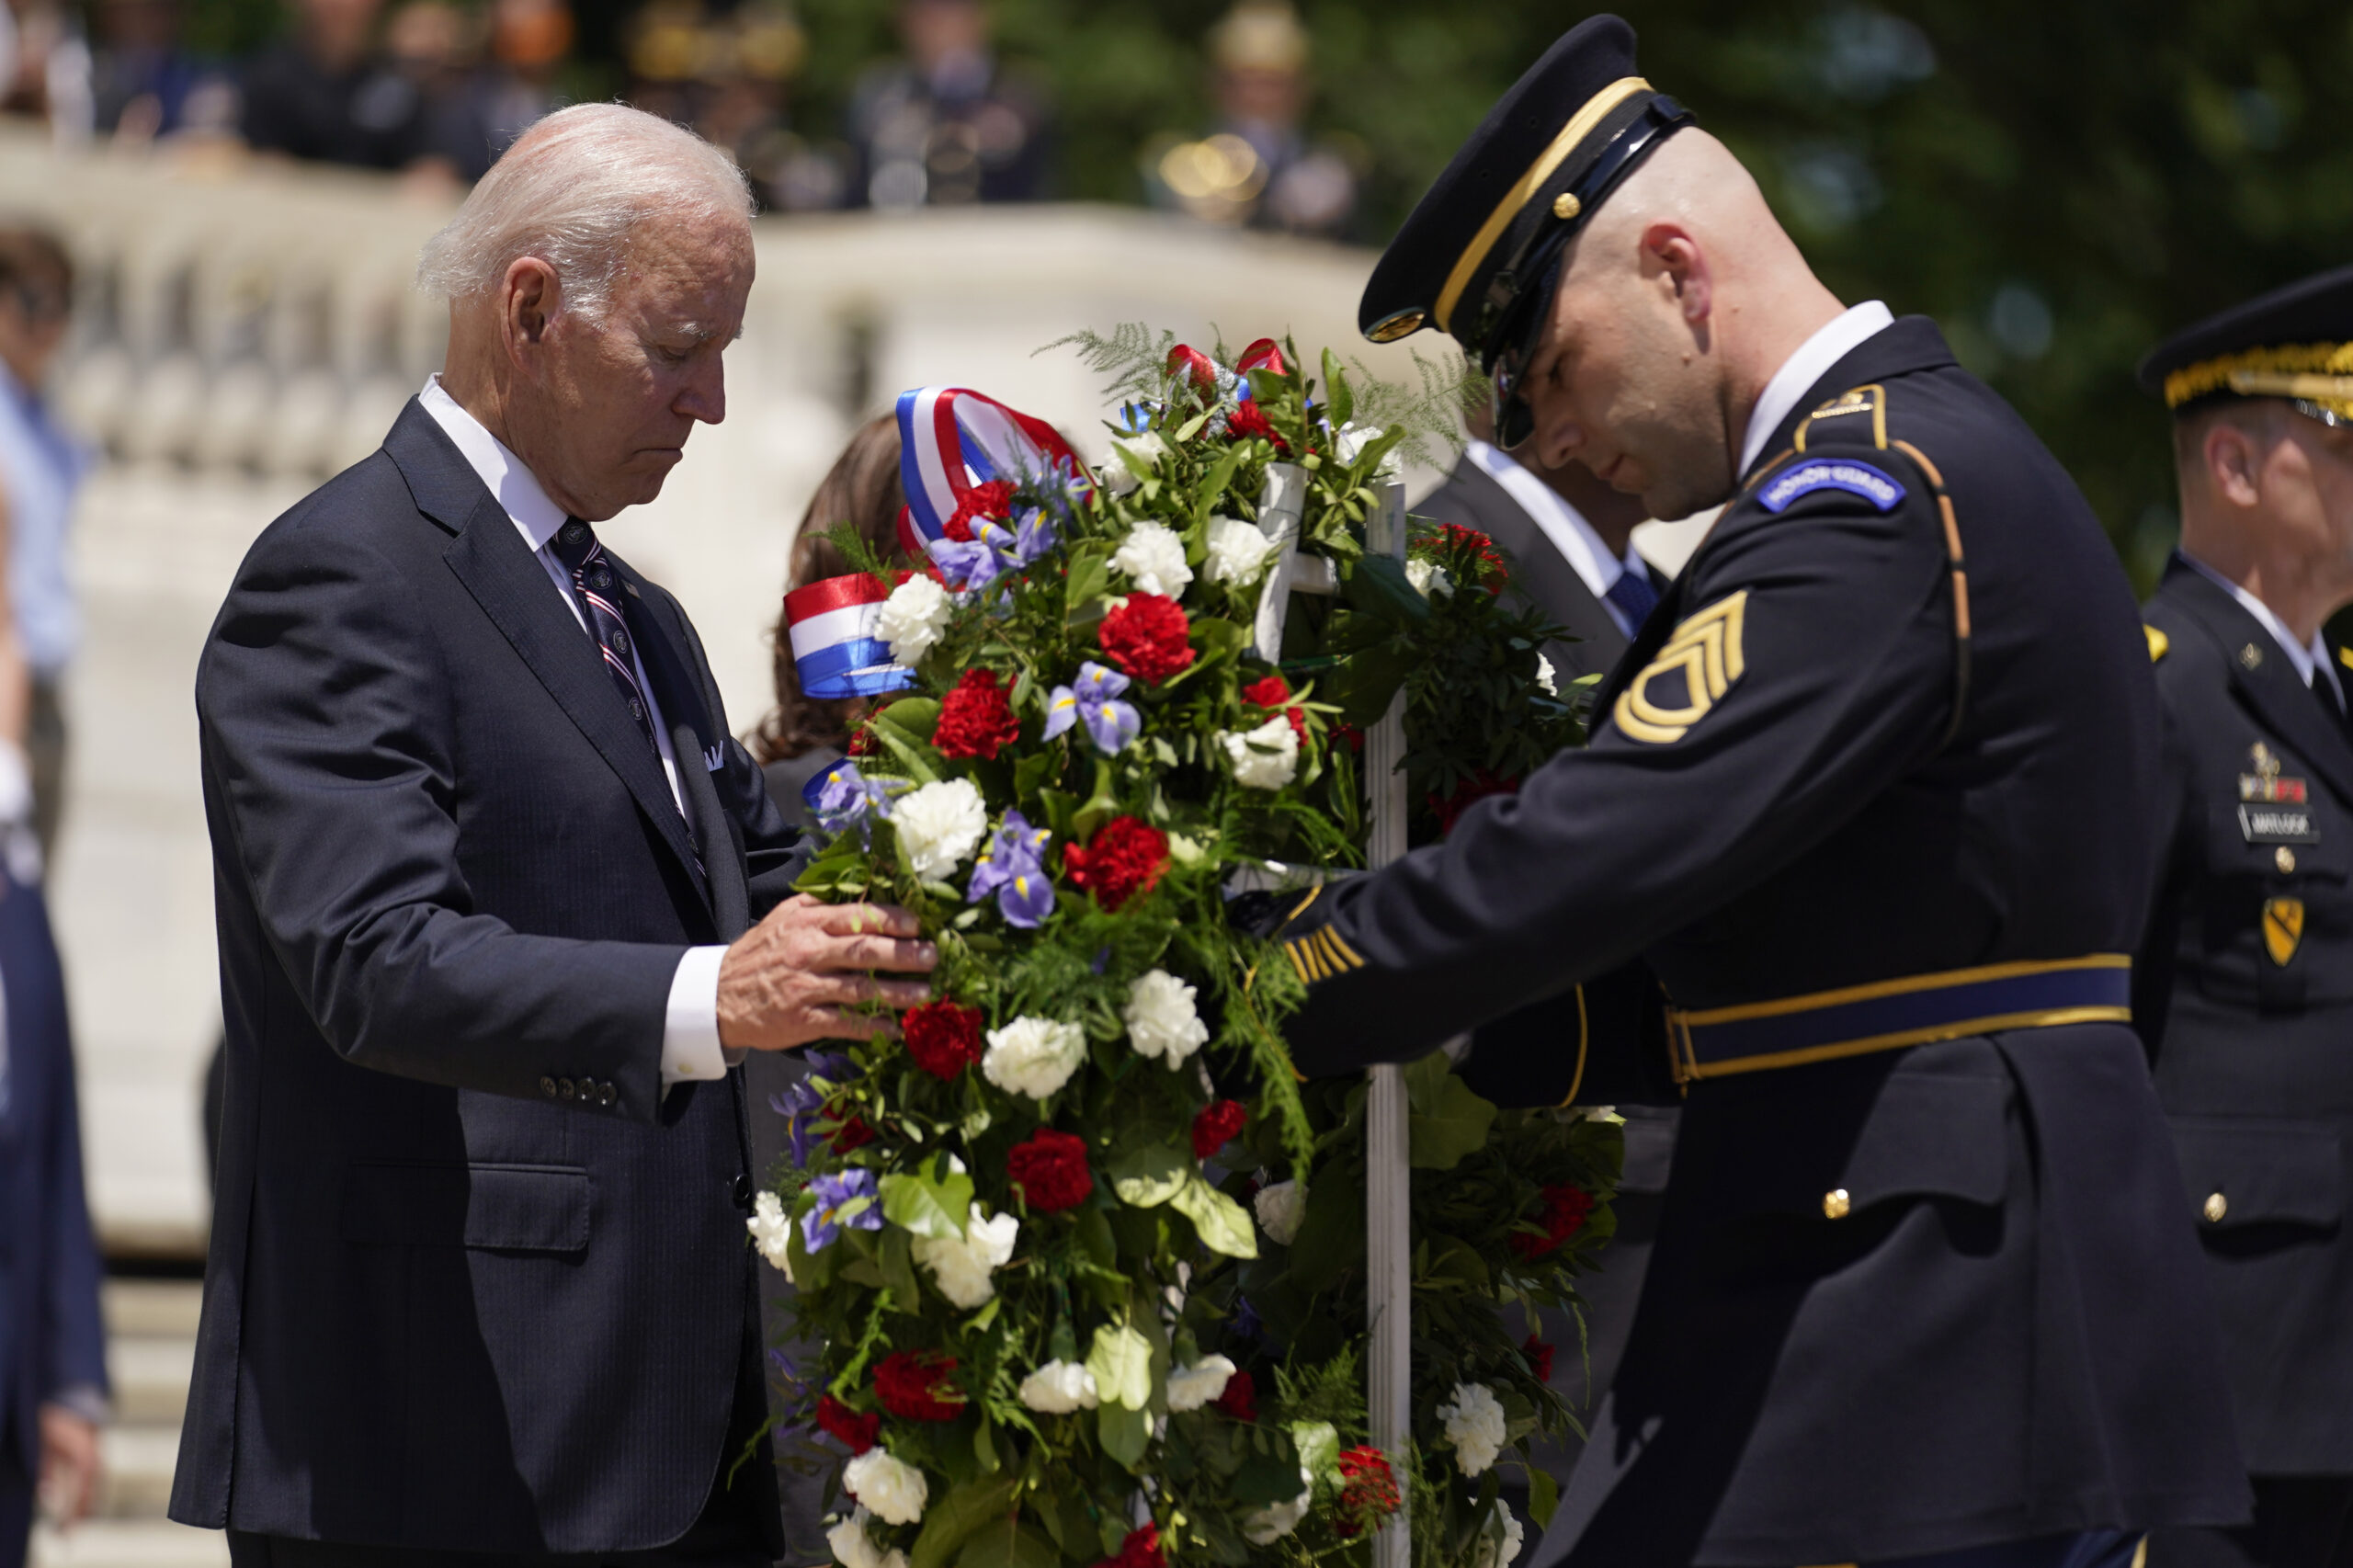 President Joe Biden lays a wreath at The Tomb of the Unknown Soldier at Arlington National Cemetery on Memorial Day, Monday, May 30, 2022, in Arlington, Va. (AP Photo/Andrew Harnik)